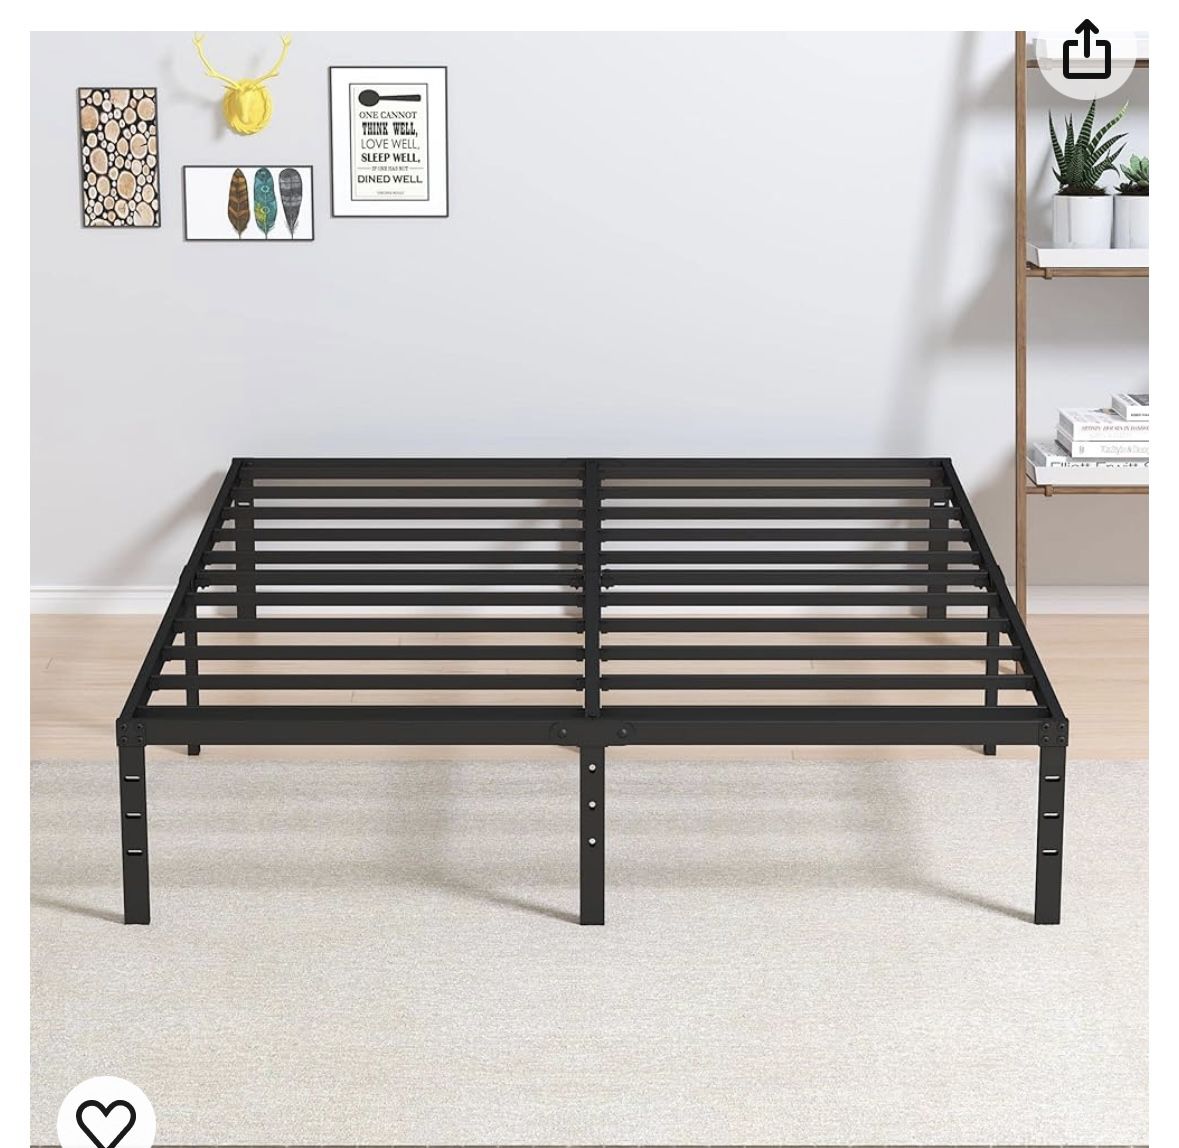 14 Inch Metal Bed Frame Queen Size No Box Spring Needed, Heavy Duty Platform Support Up to 3000 lbs, Easy Assembly, Noise Free, Black